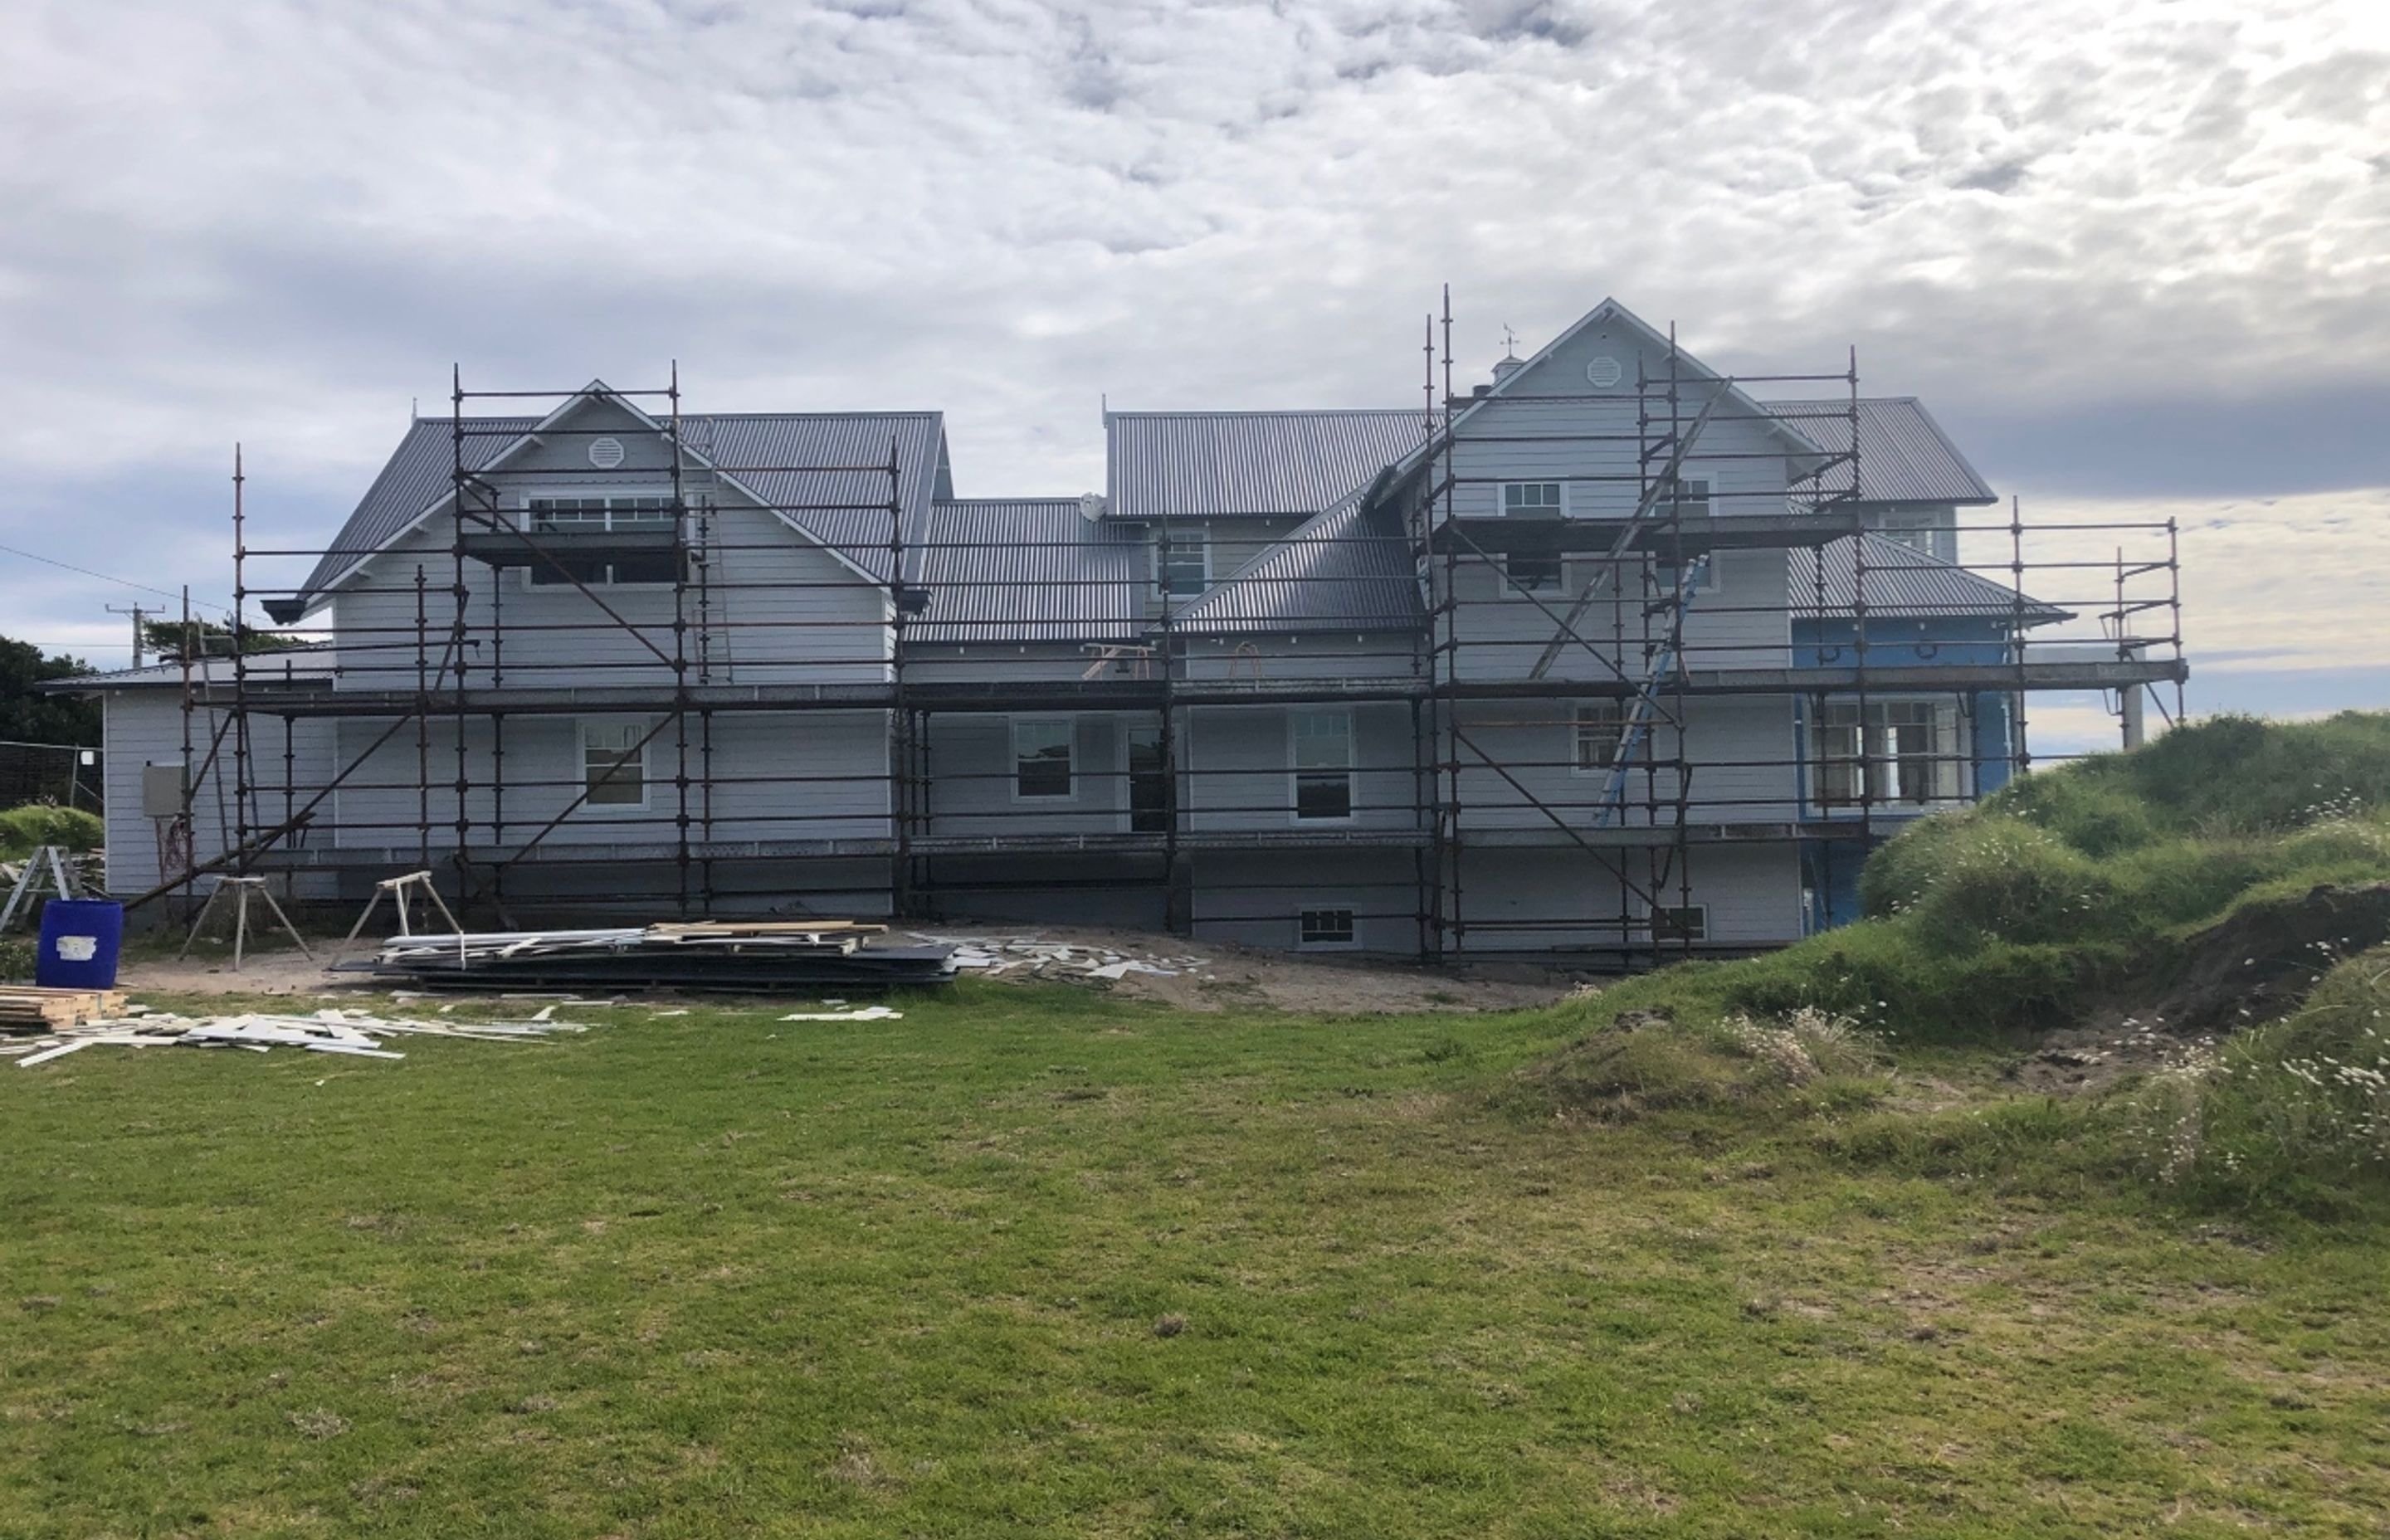 External Painting Near Completion. Photography: Hawksley Developments